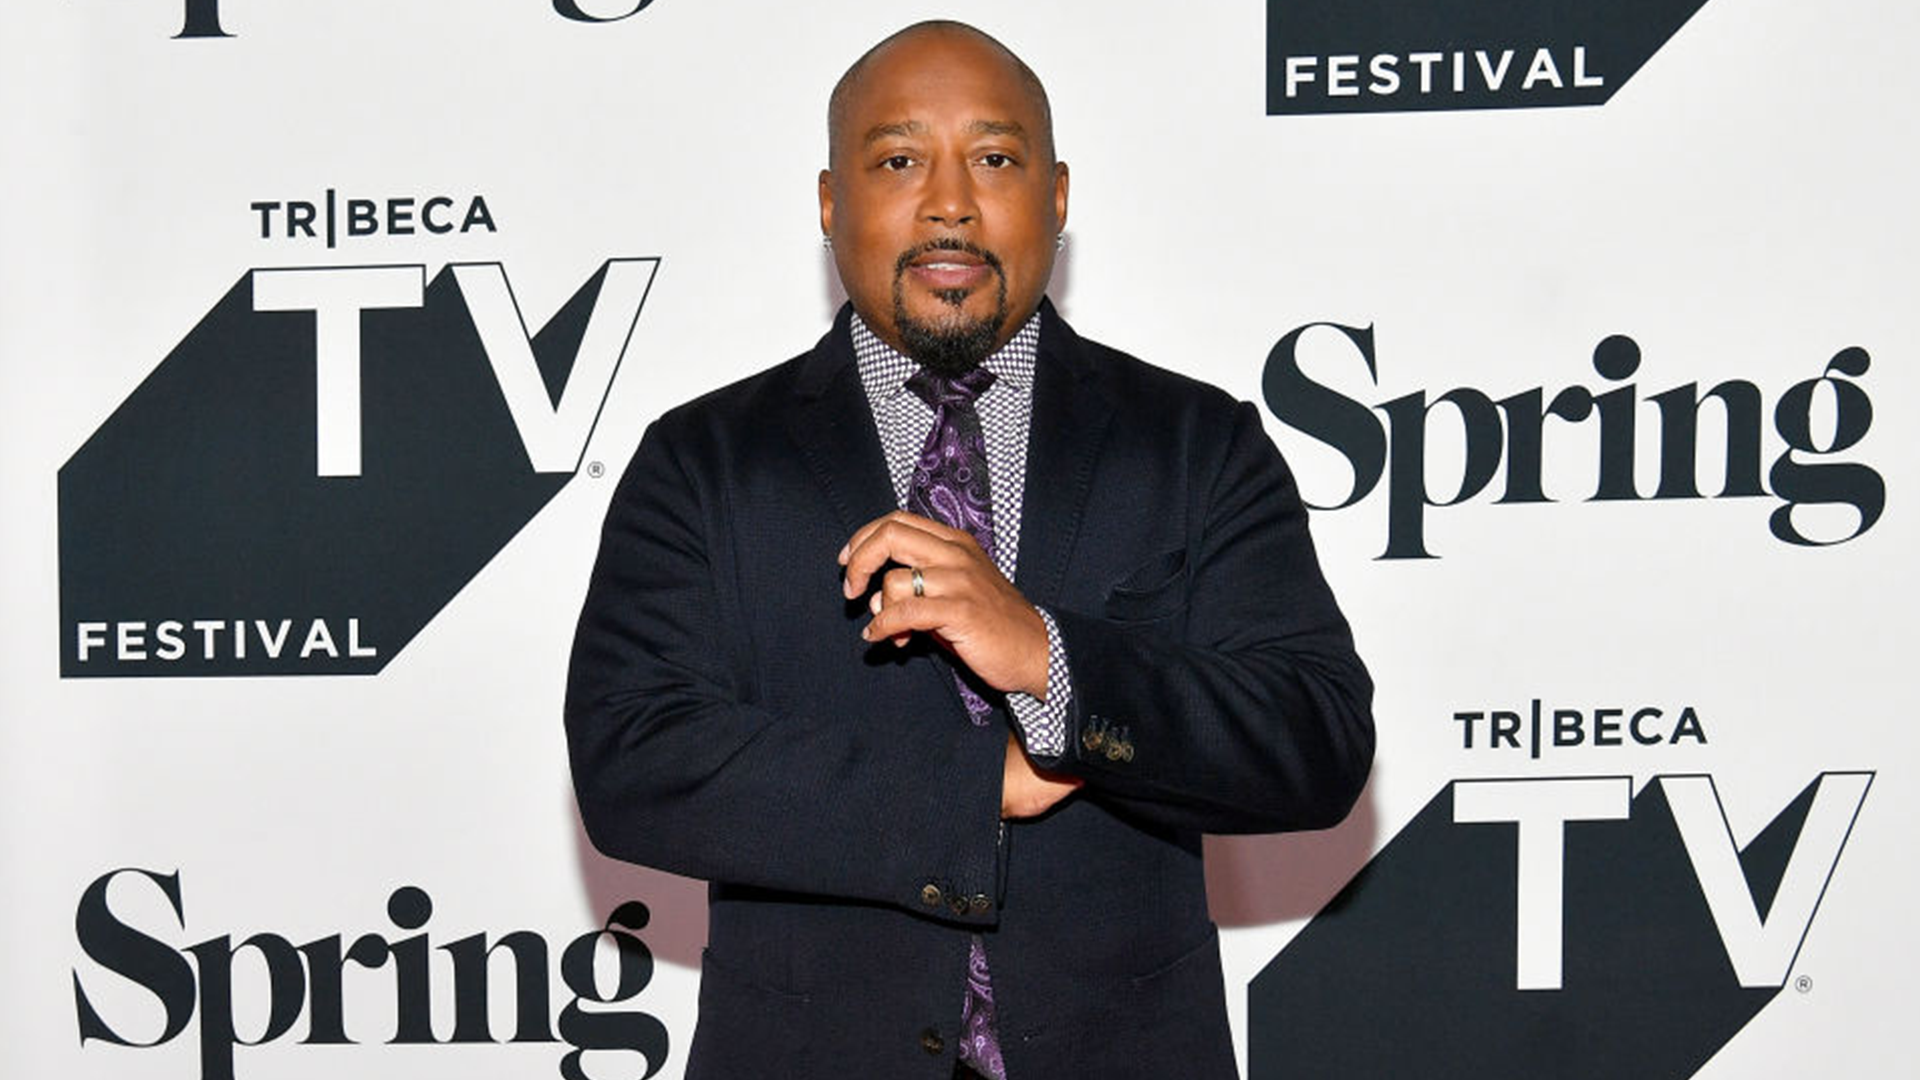 Daymond John Joins Board Of Directors For Overtime, A Sports Company Backed By Jeff Bezos, Drake, And More